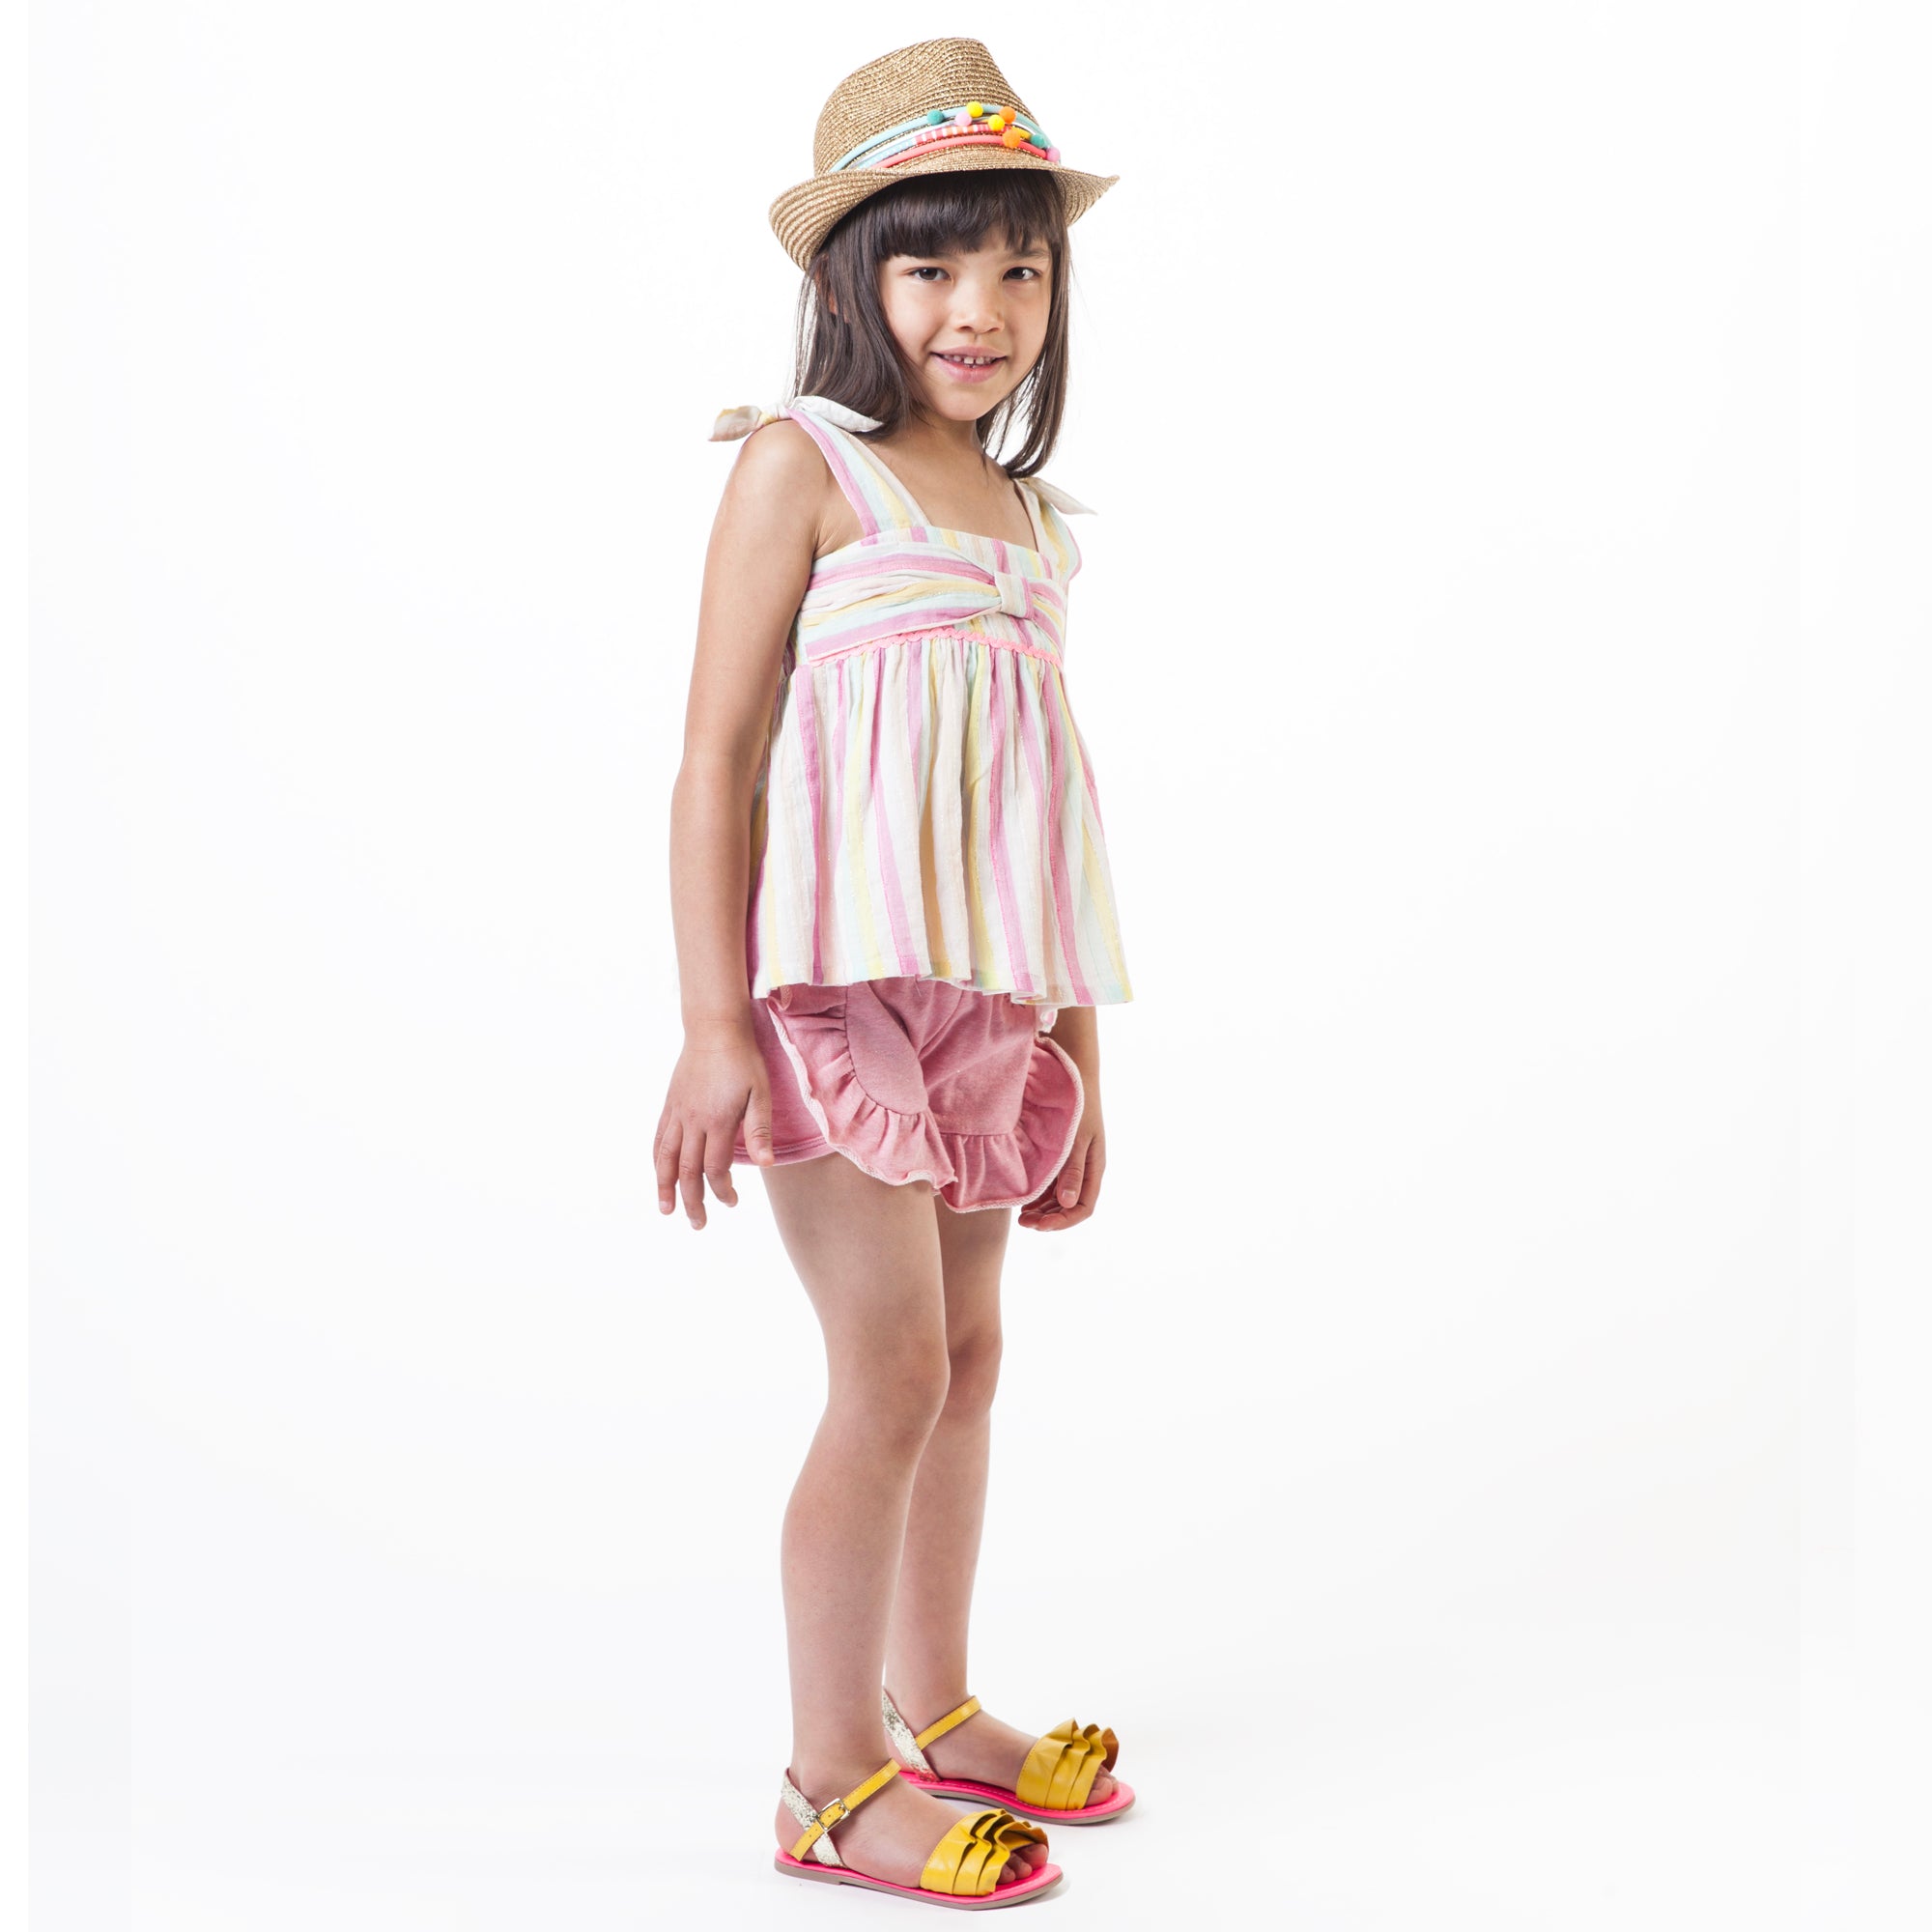 Girls Sun Hat With Chromatic Rope